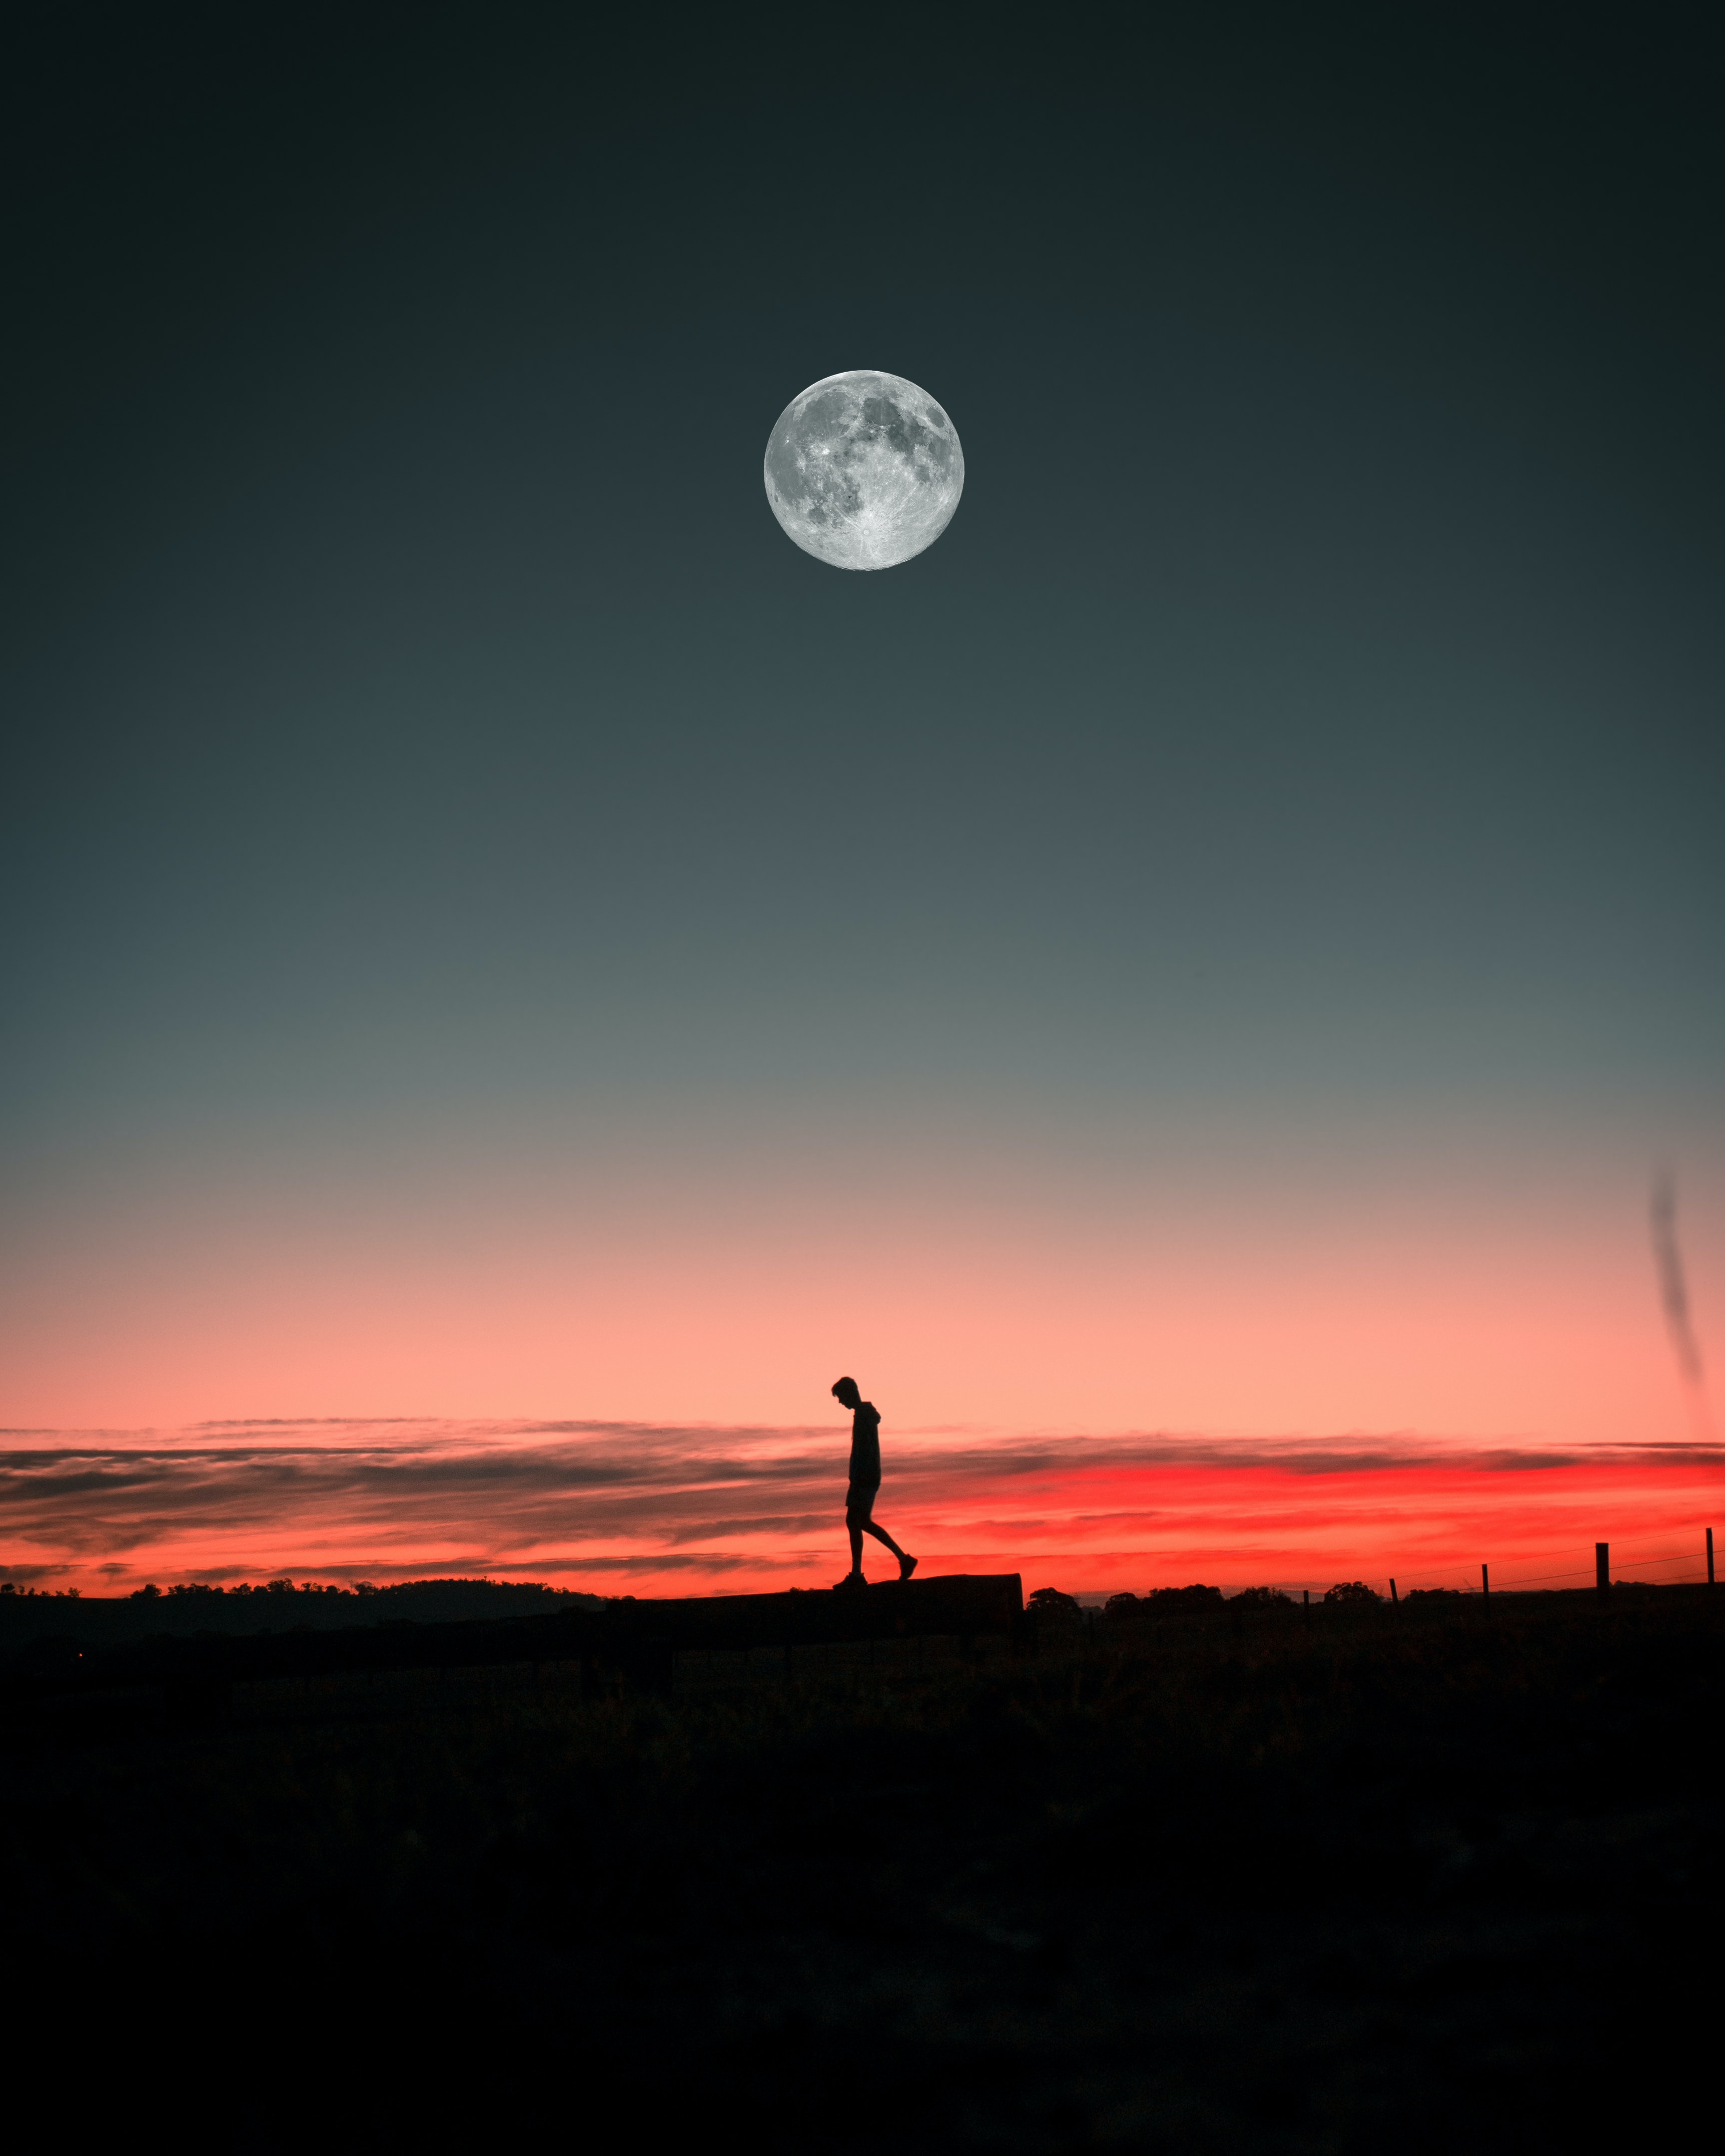 alone, moon, lonely, loneliness, silhouette, sunset, miscellanea, miscellaneous High Definition image